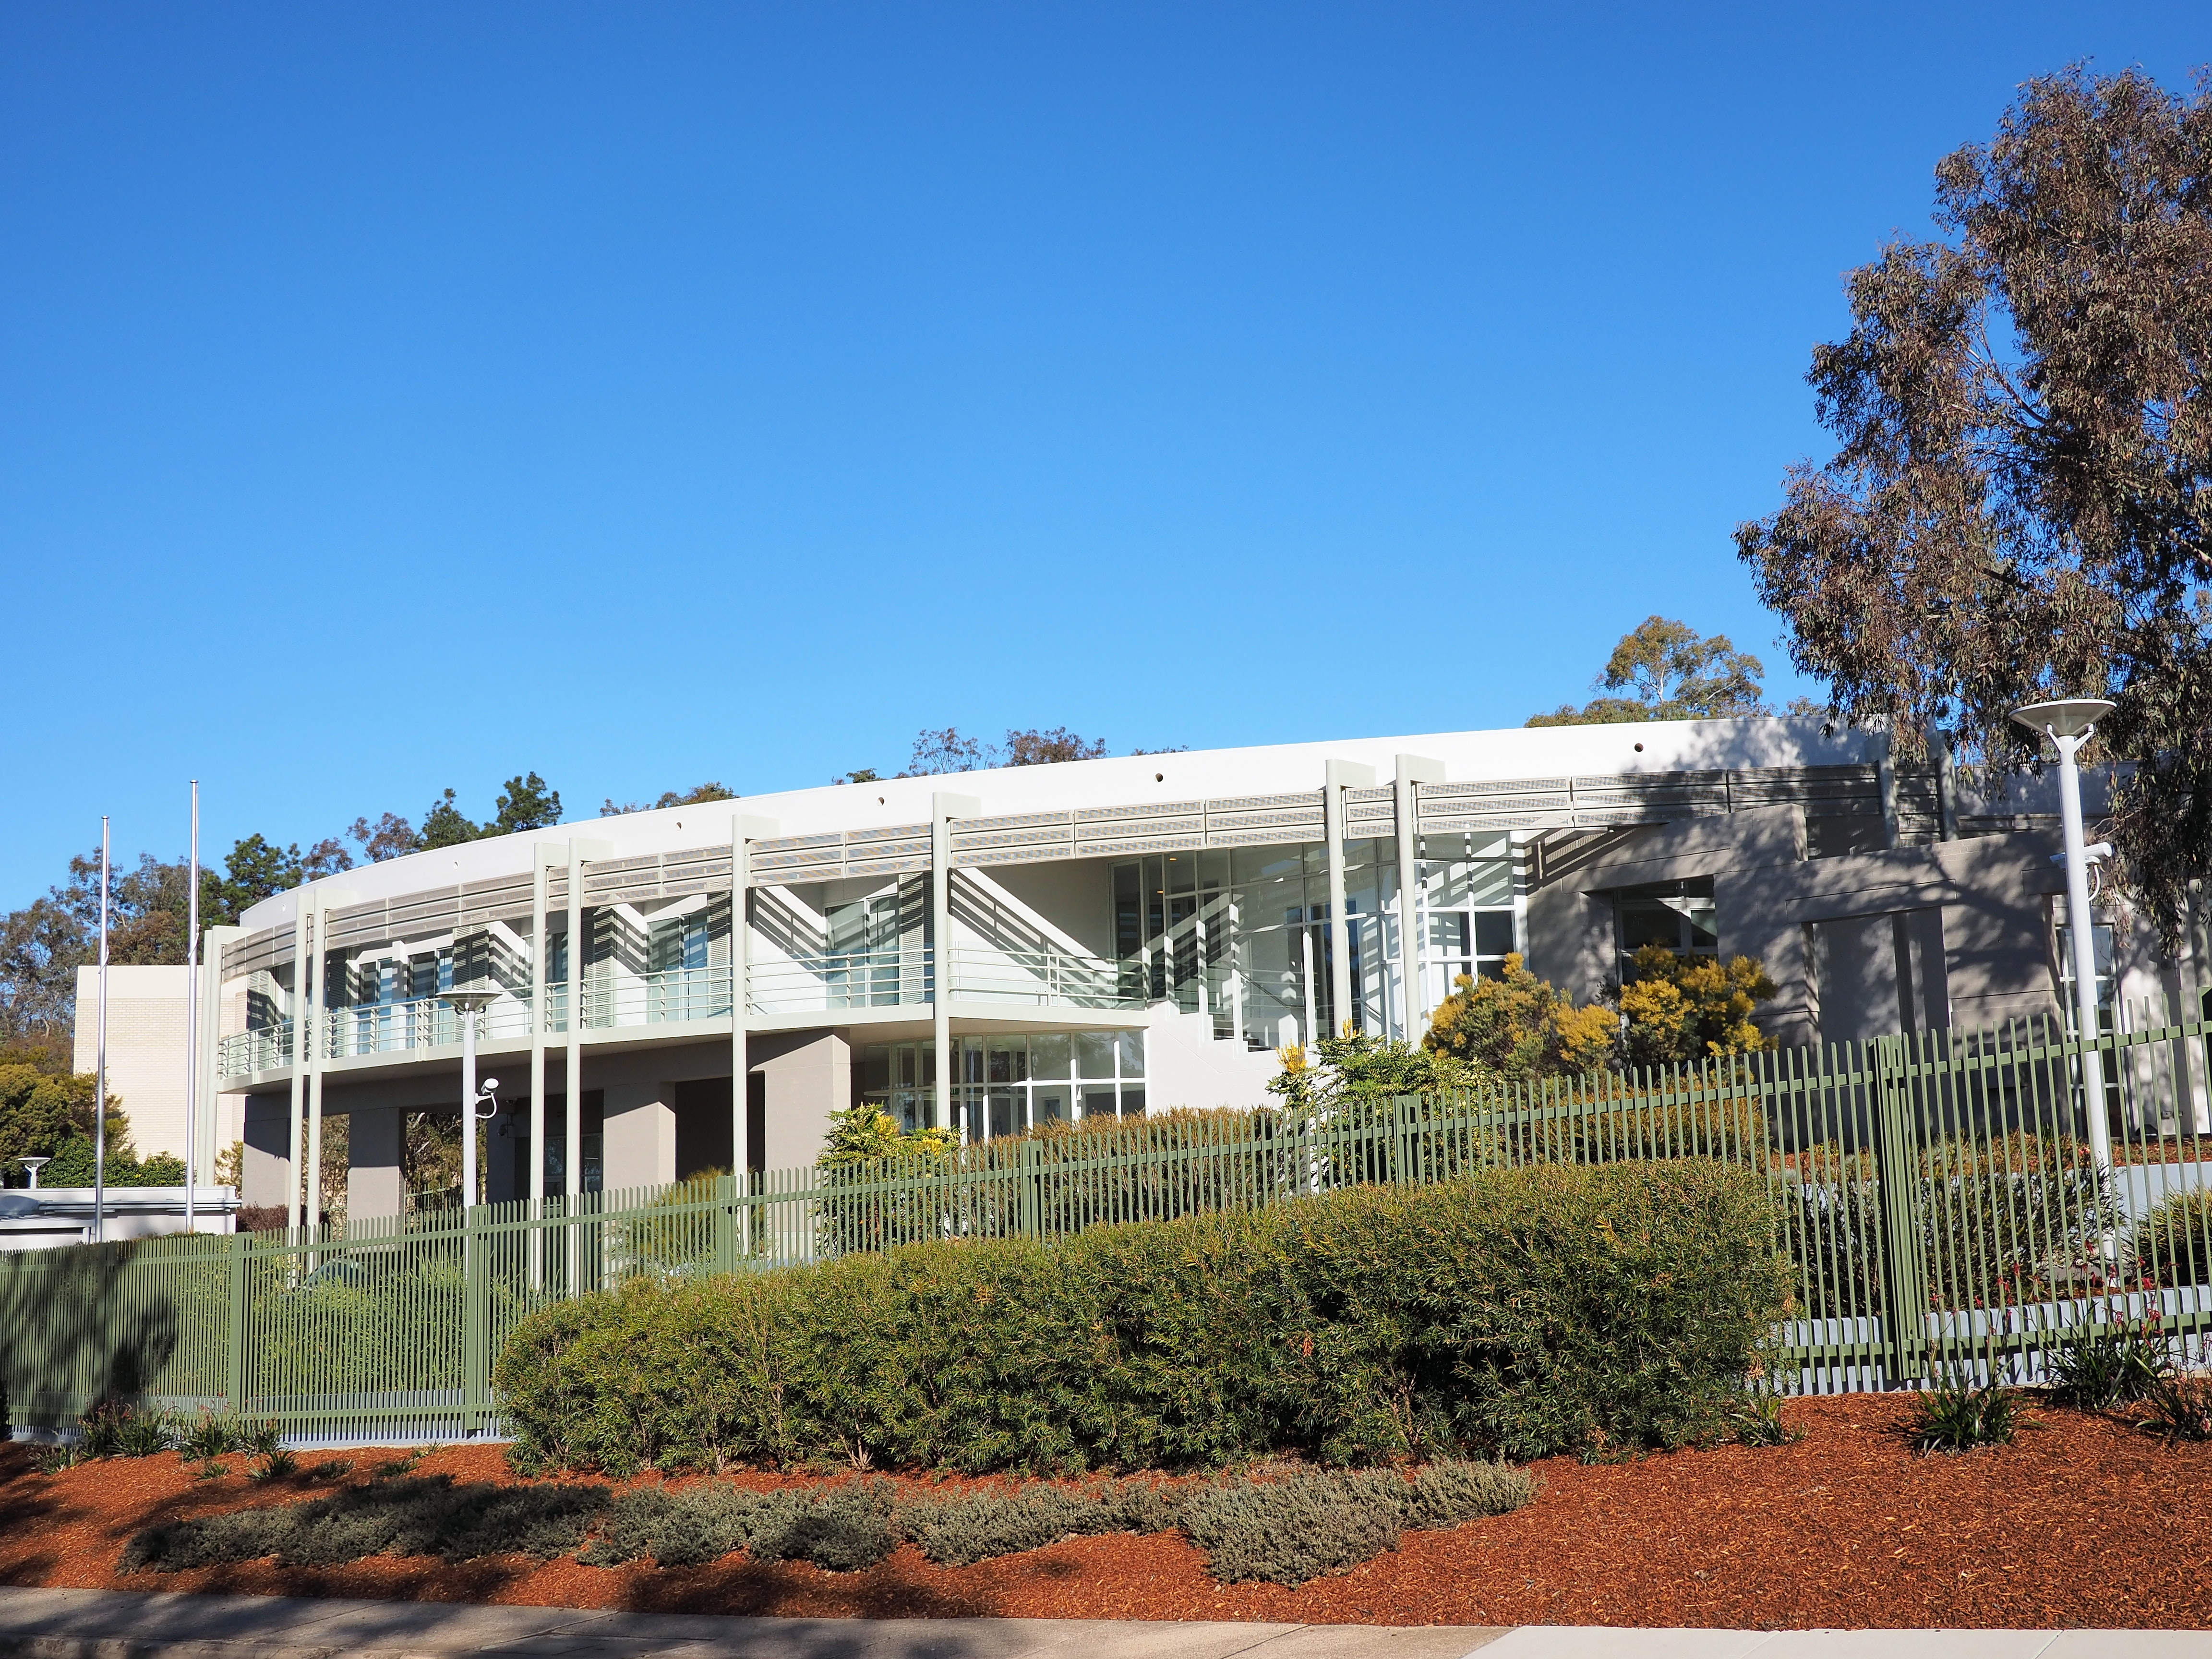 File:High Commission of to Australia July 2014.jpg Wikimedia Commons